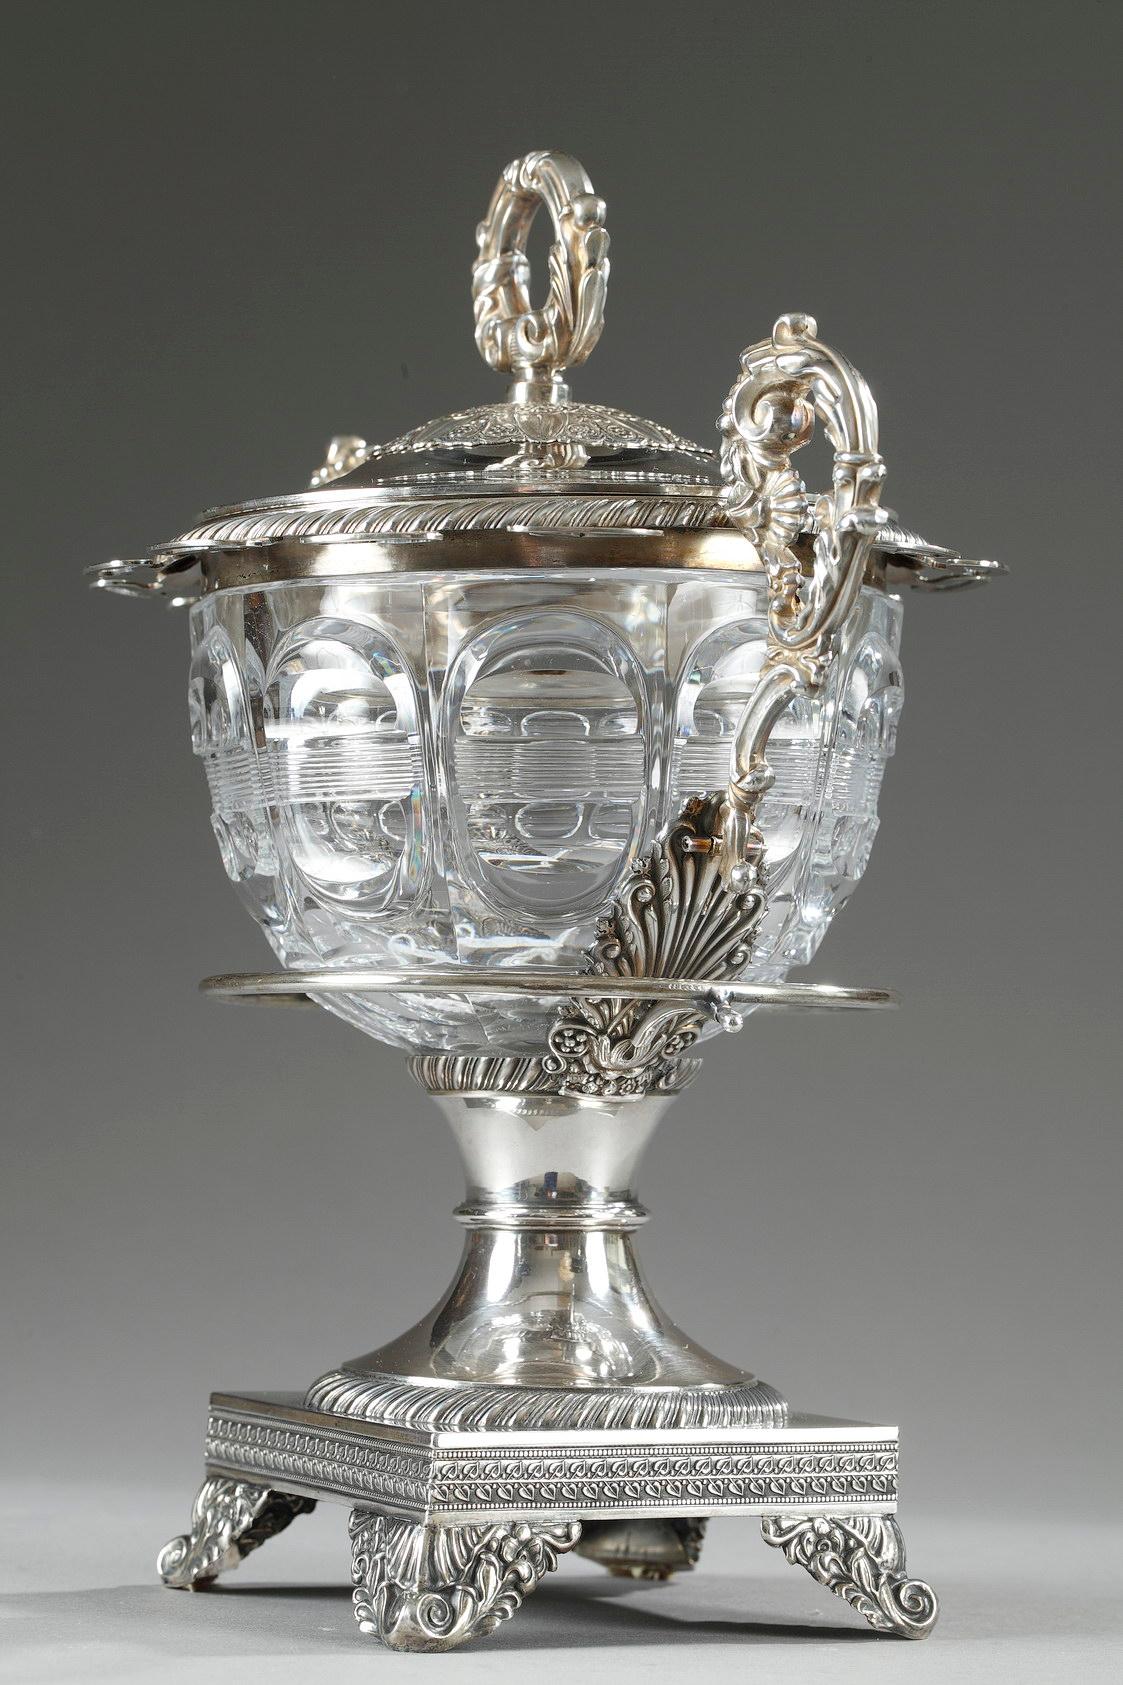 Mid-19th Century 19th Century Large Silver and Cut-Crystal Confiturier, with 12 Spoons